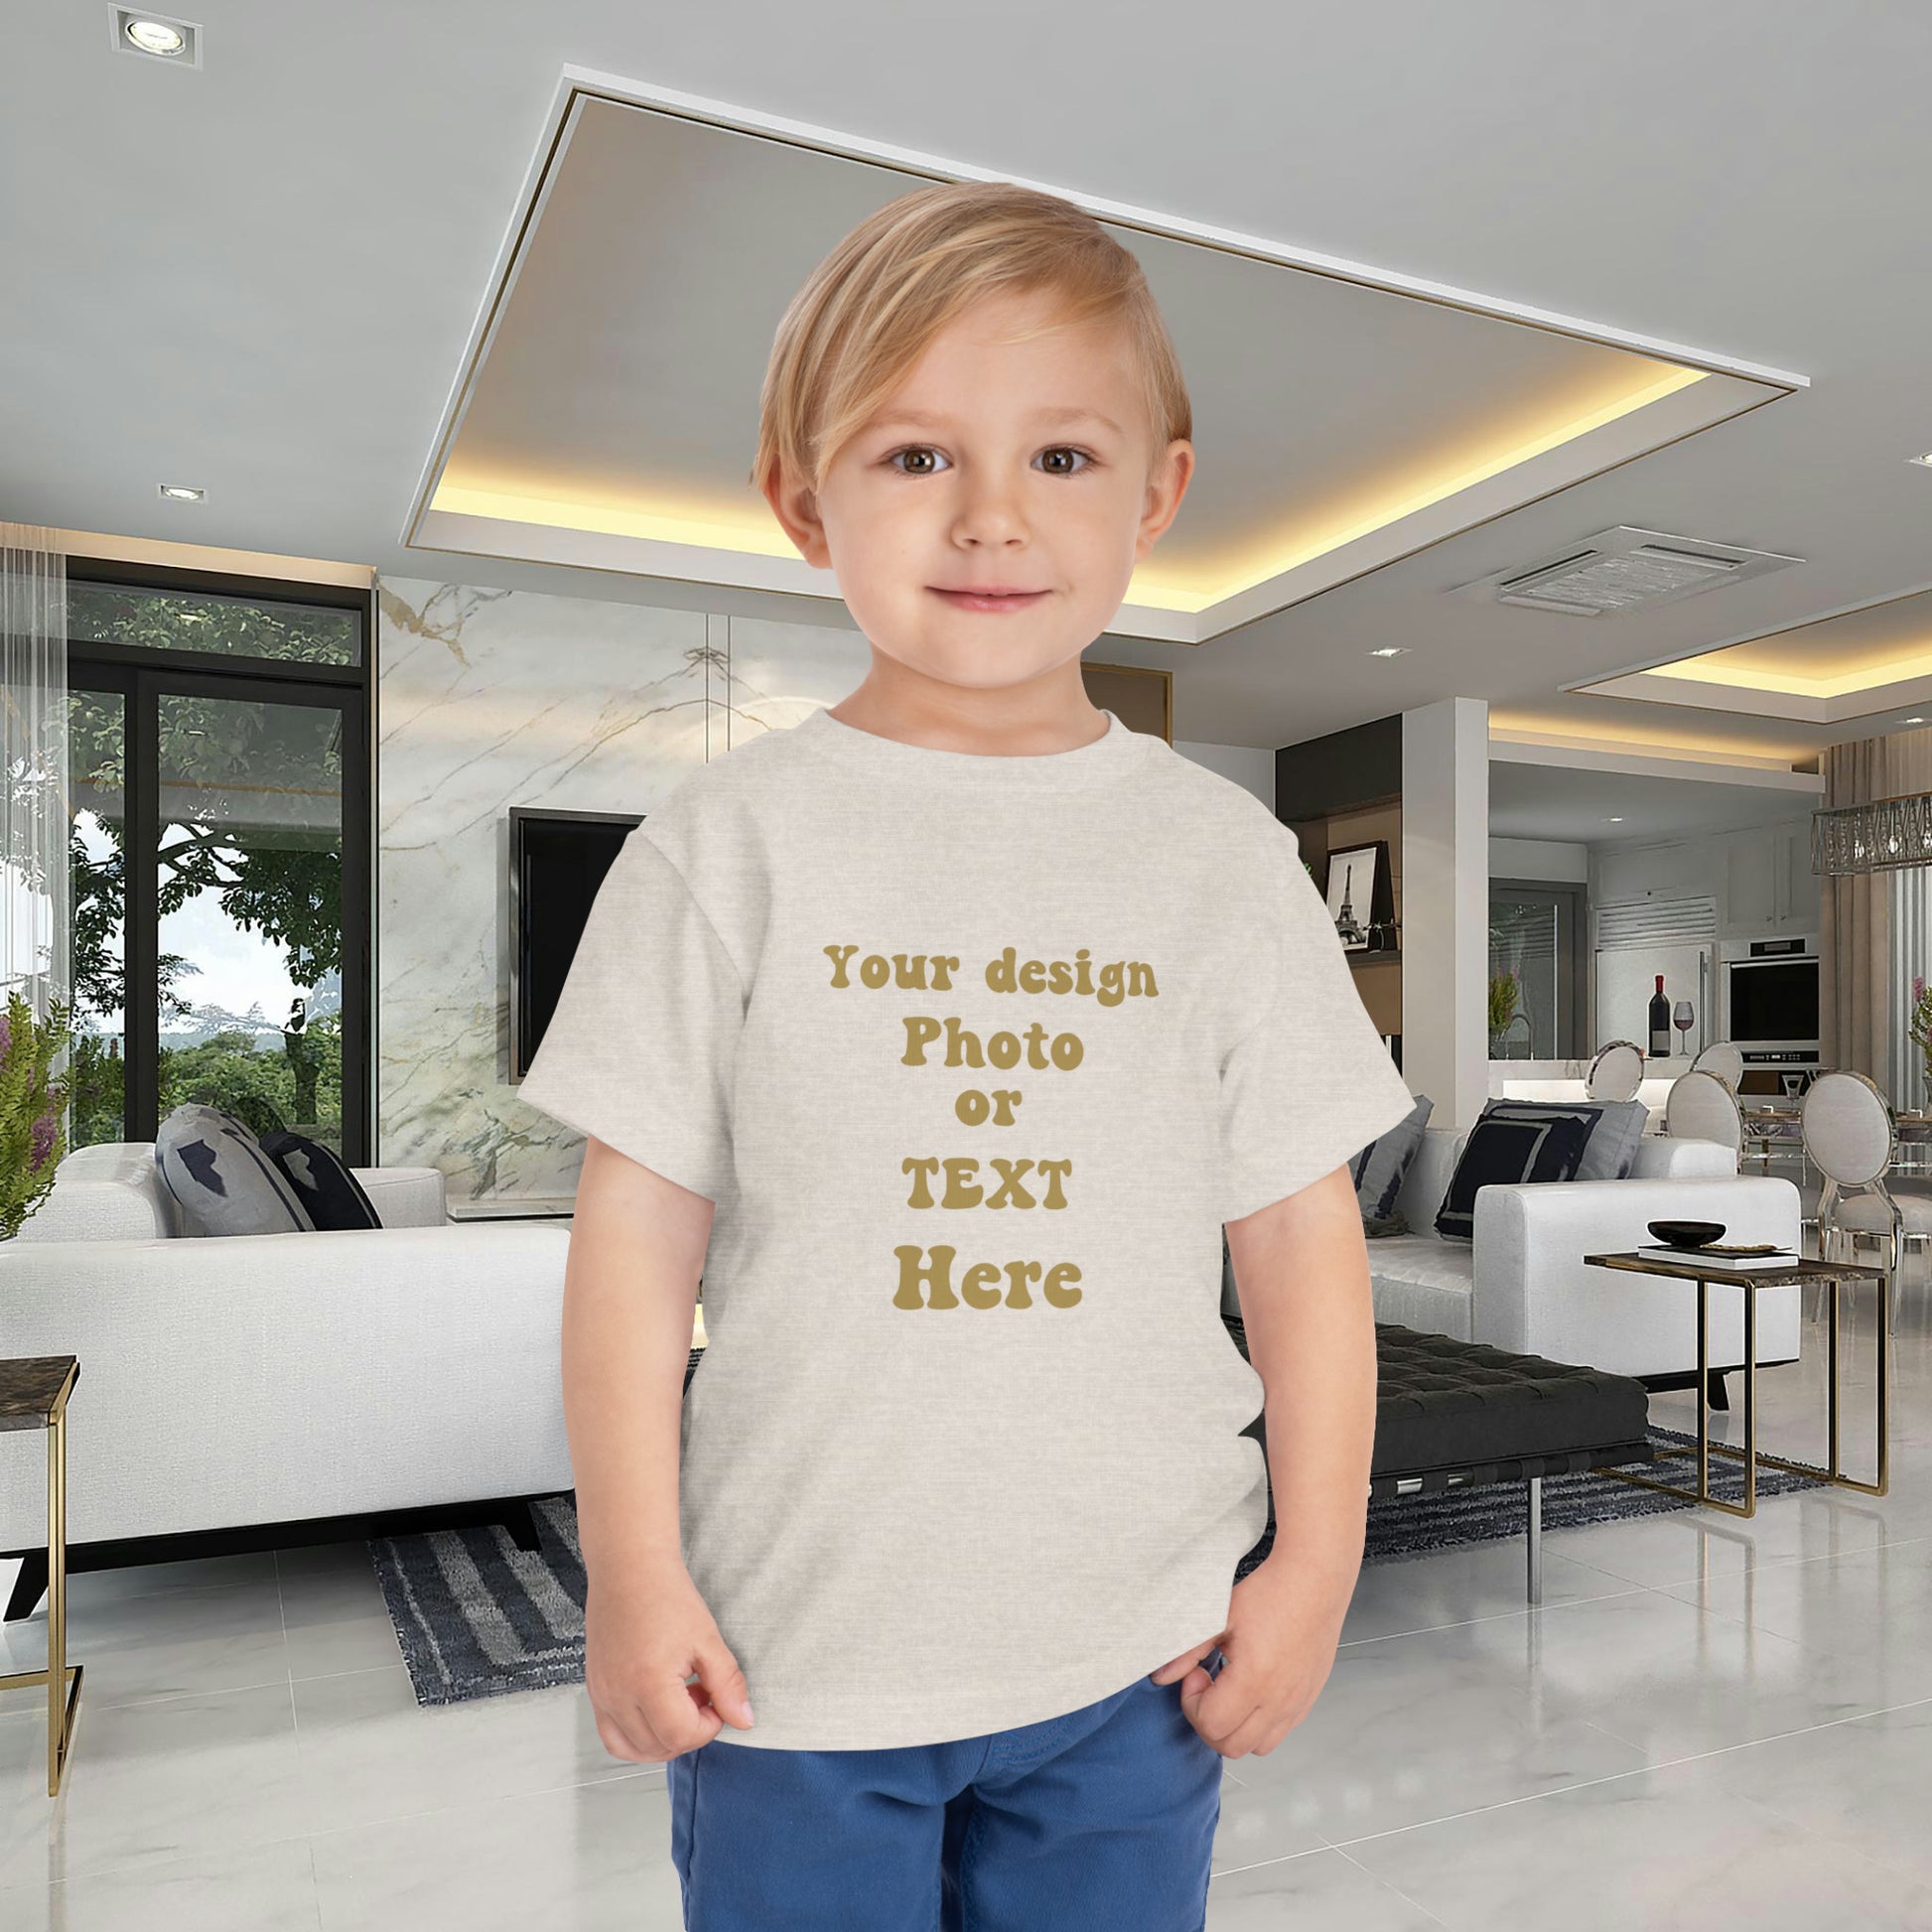 Dress Your Little One in Style with our Toddler Short Sleeve Tee - A Personalized Fashion Statement for Your Precious Tot Kids clothes   